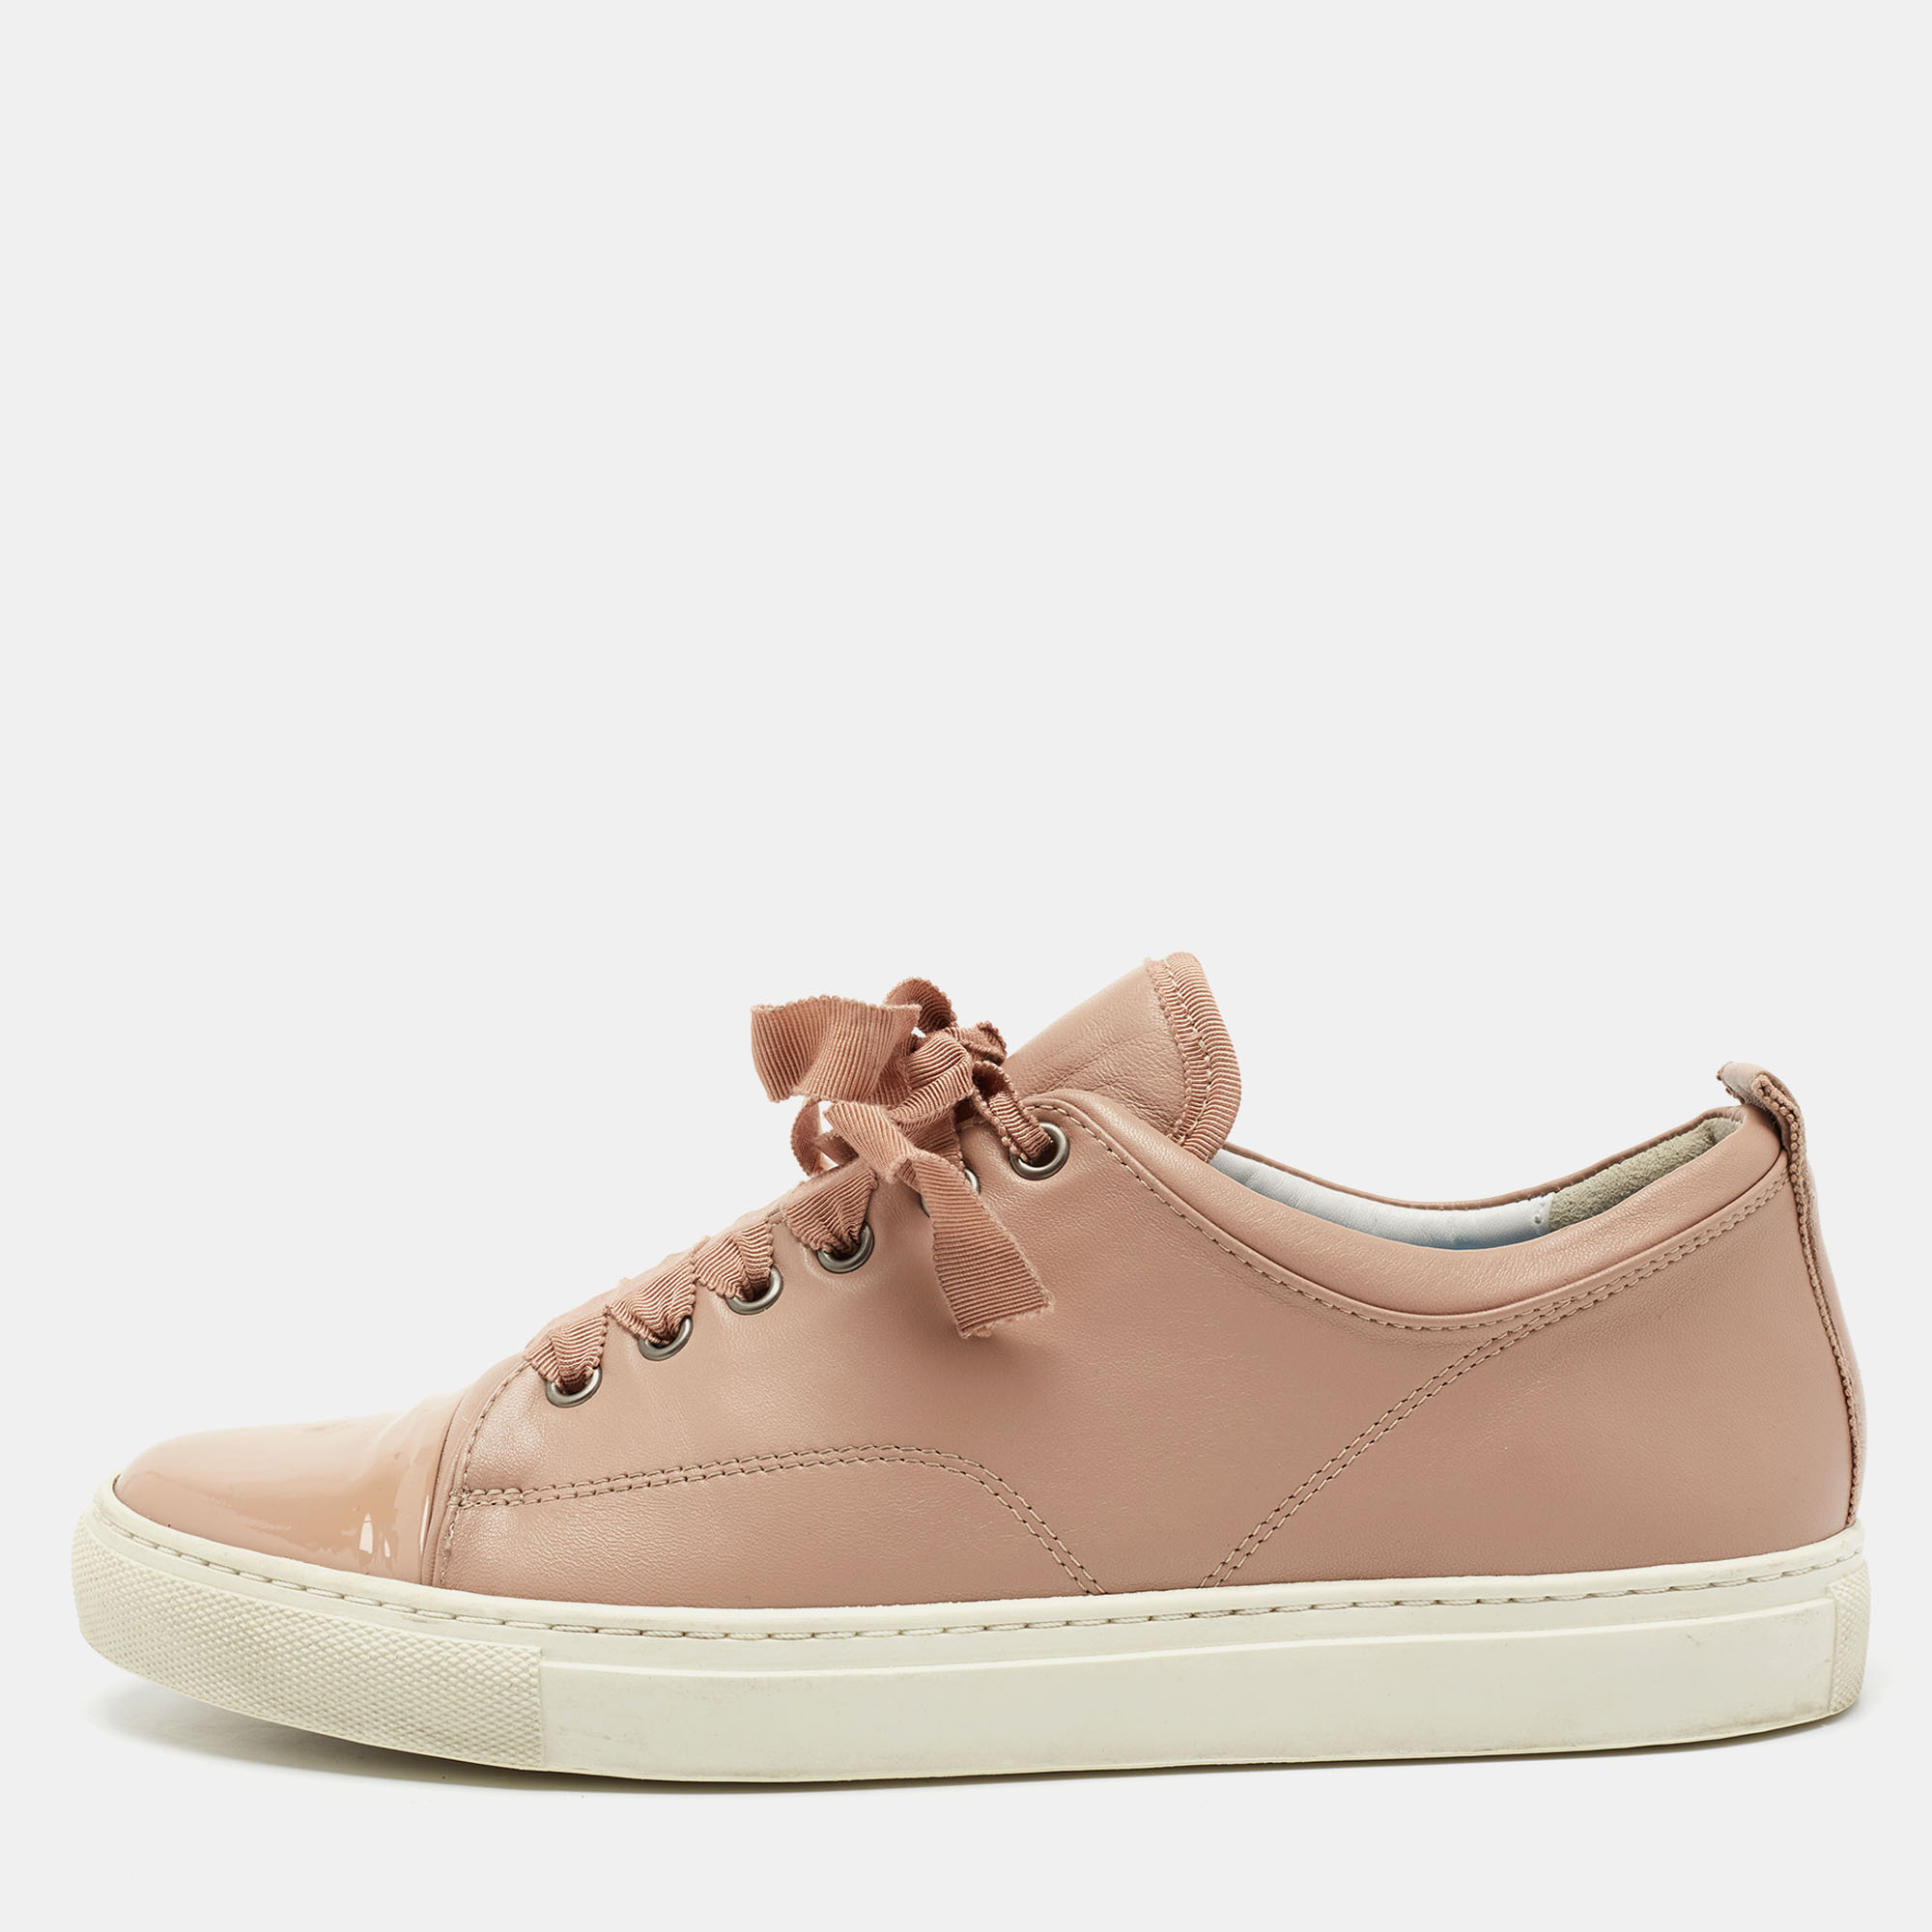 Lanvin dusty pink leather and patent cap toe low-top sneakers size 40